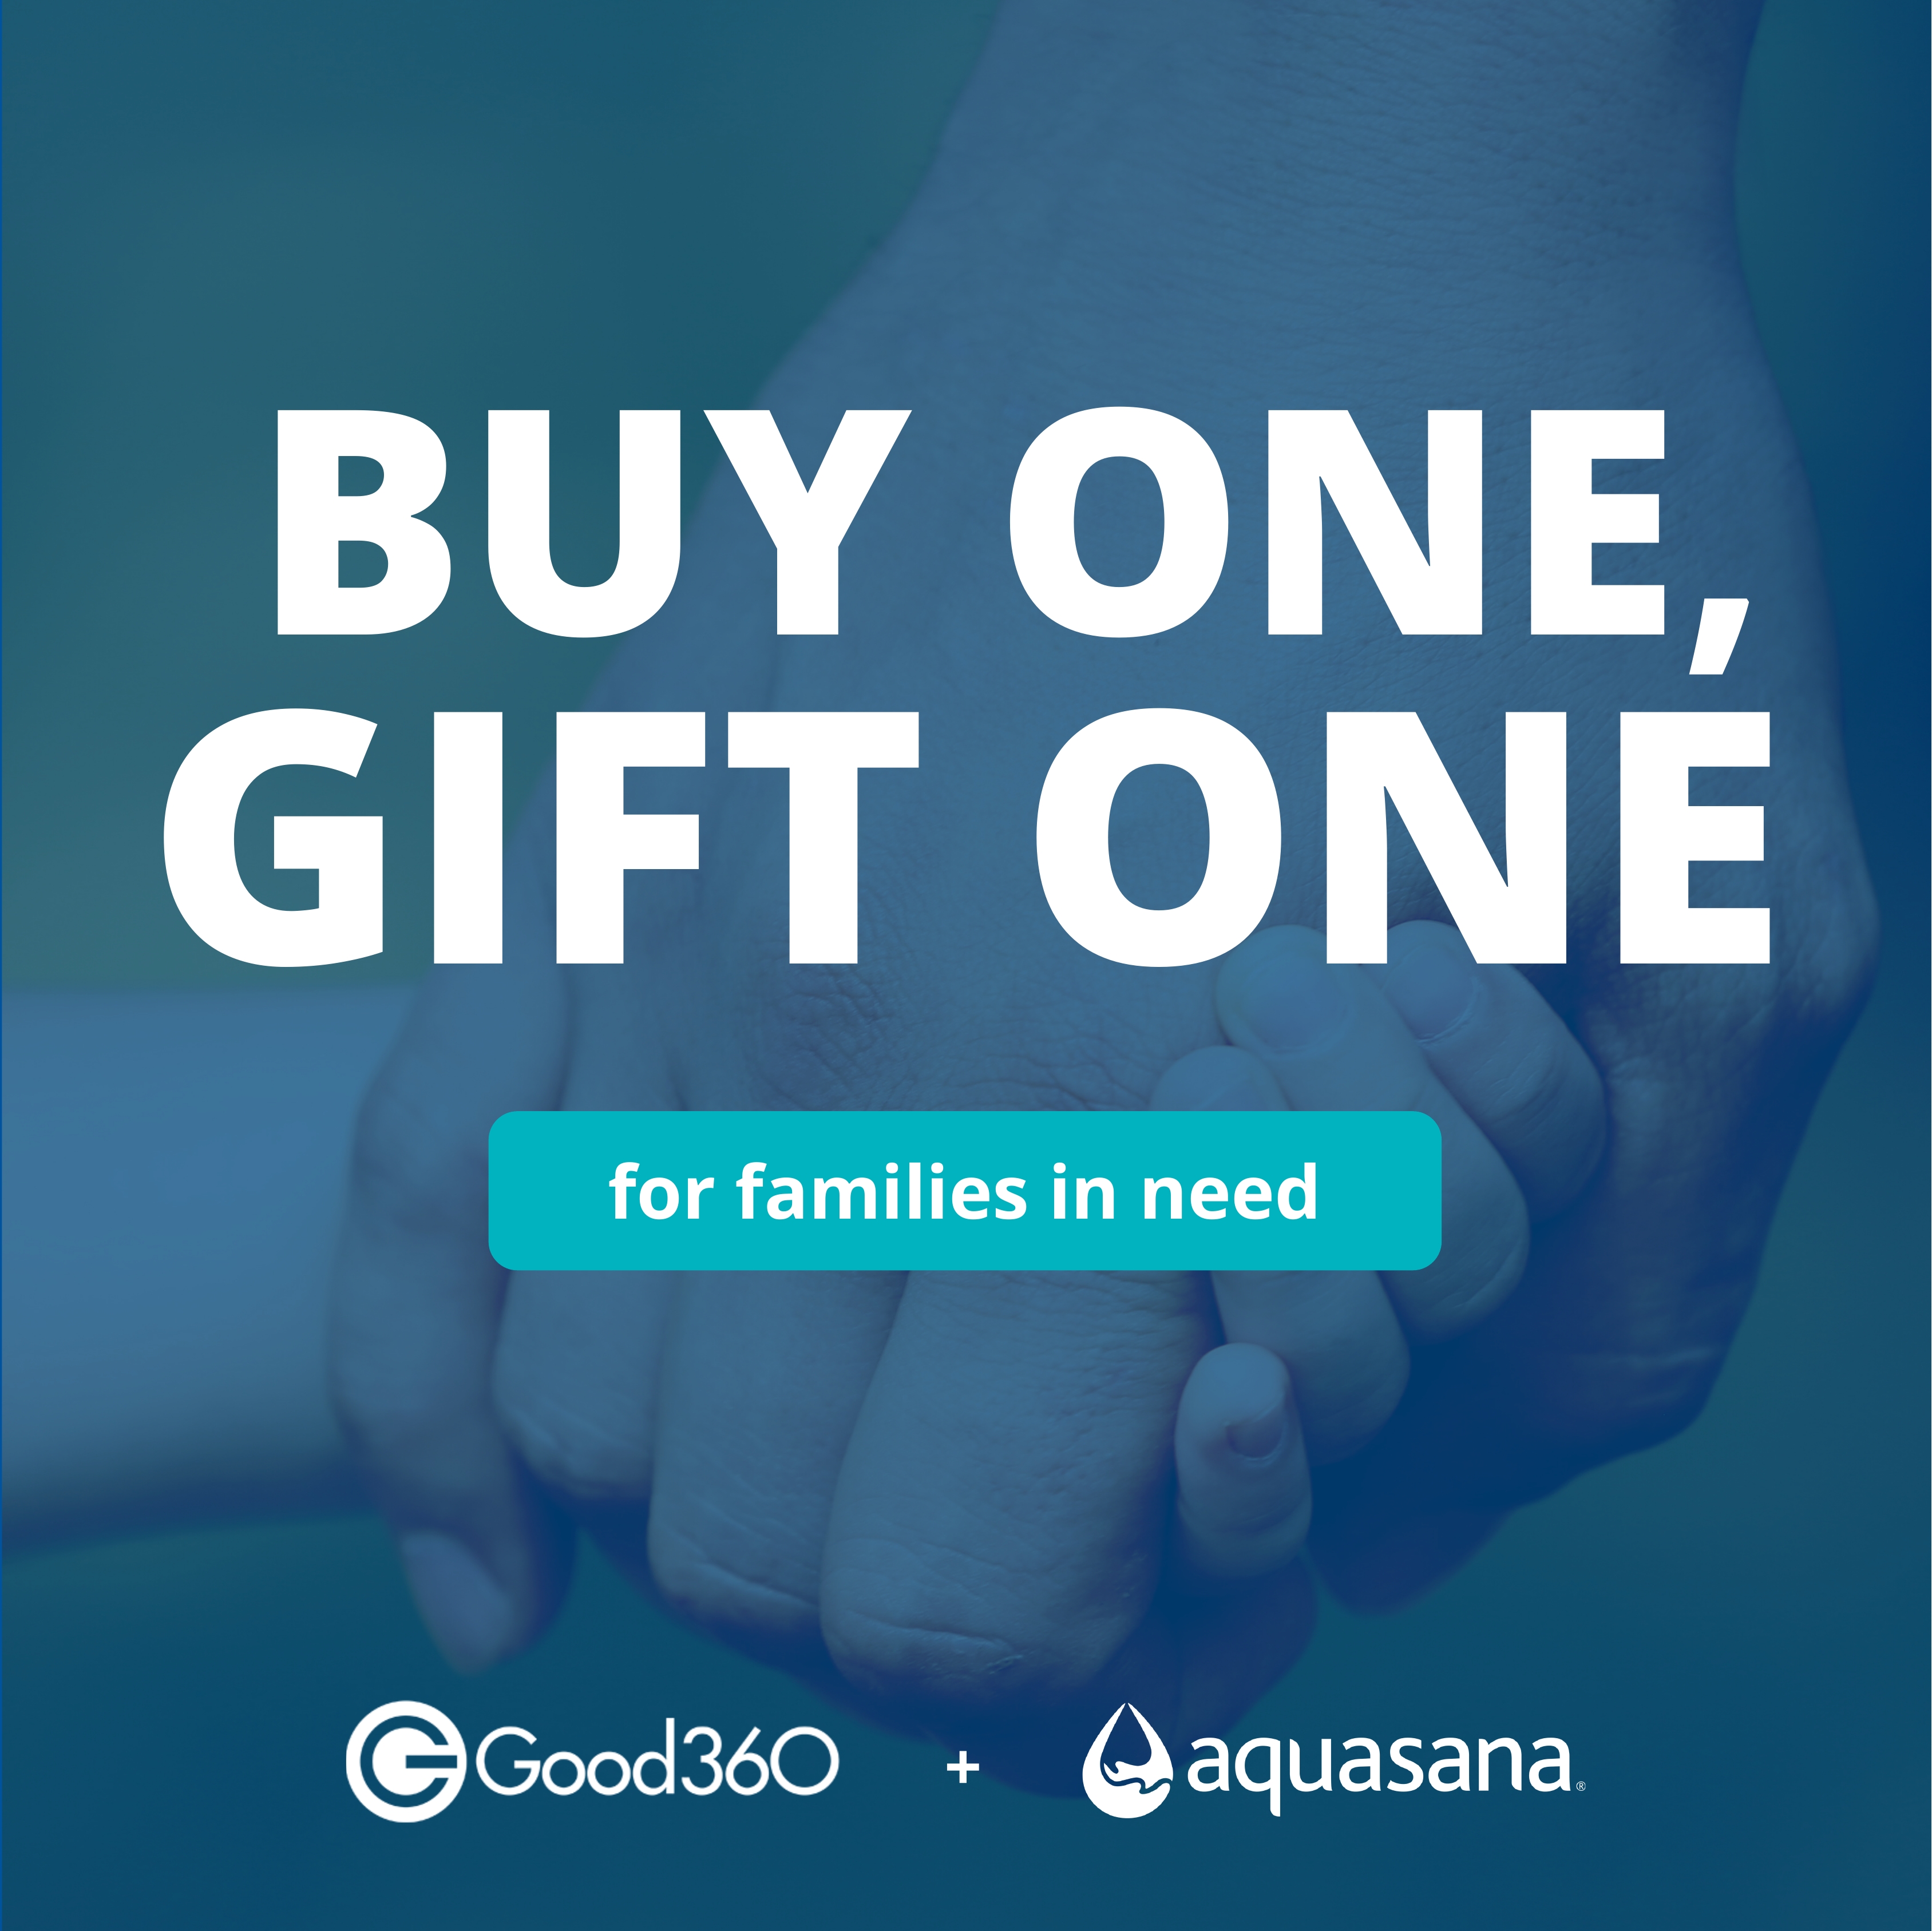 For every Clean Water Machine purchased through the end of June, Aquasana will donate one to a family in need of clean drinking water..